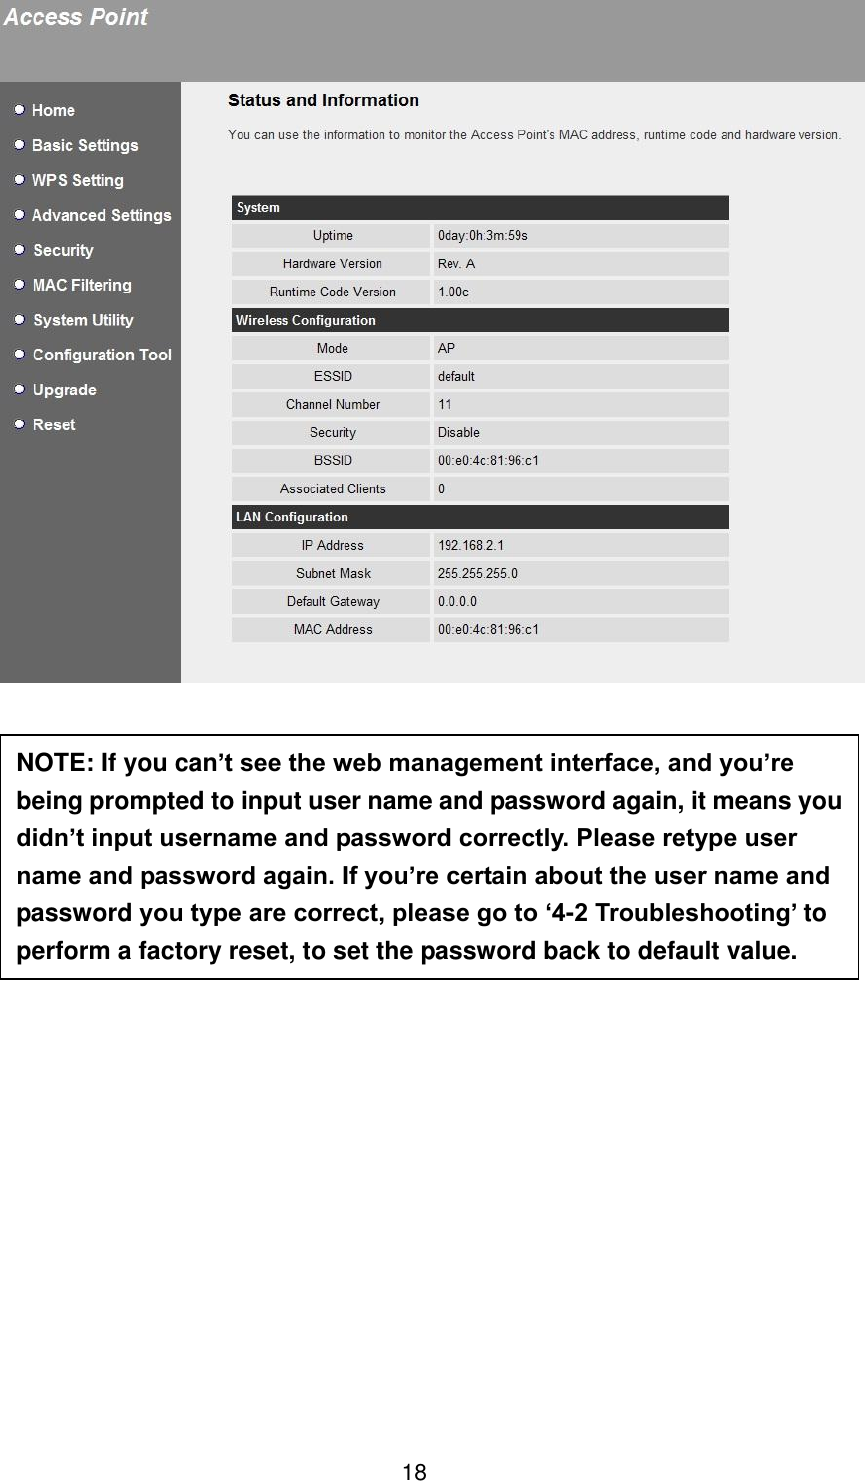 18                 NOTE: If you can’t see the web management interface, and you’re being prompted to input user name and password again, it means you didn’t input username and password correctly. Please retype user name and password again. If you’re certain about the user name and password you type are correct, please go to ‘4-2 Troubleshooting’ to perform a factory reset, to set the password back to default value. 